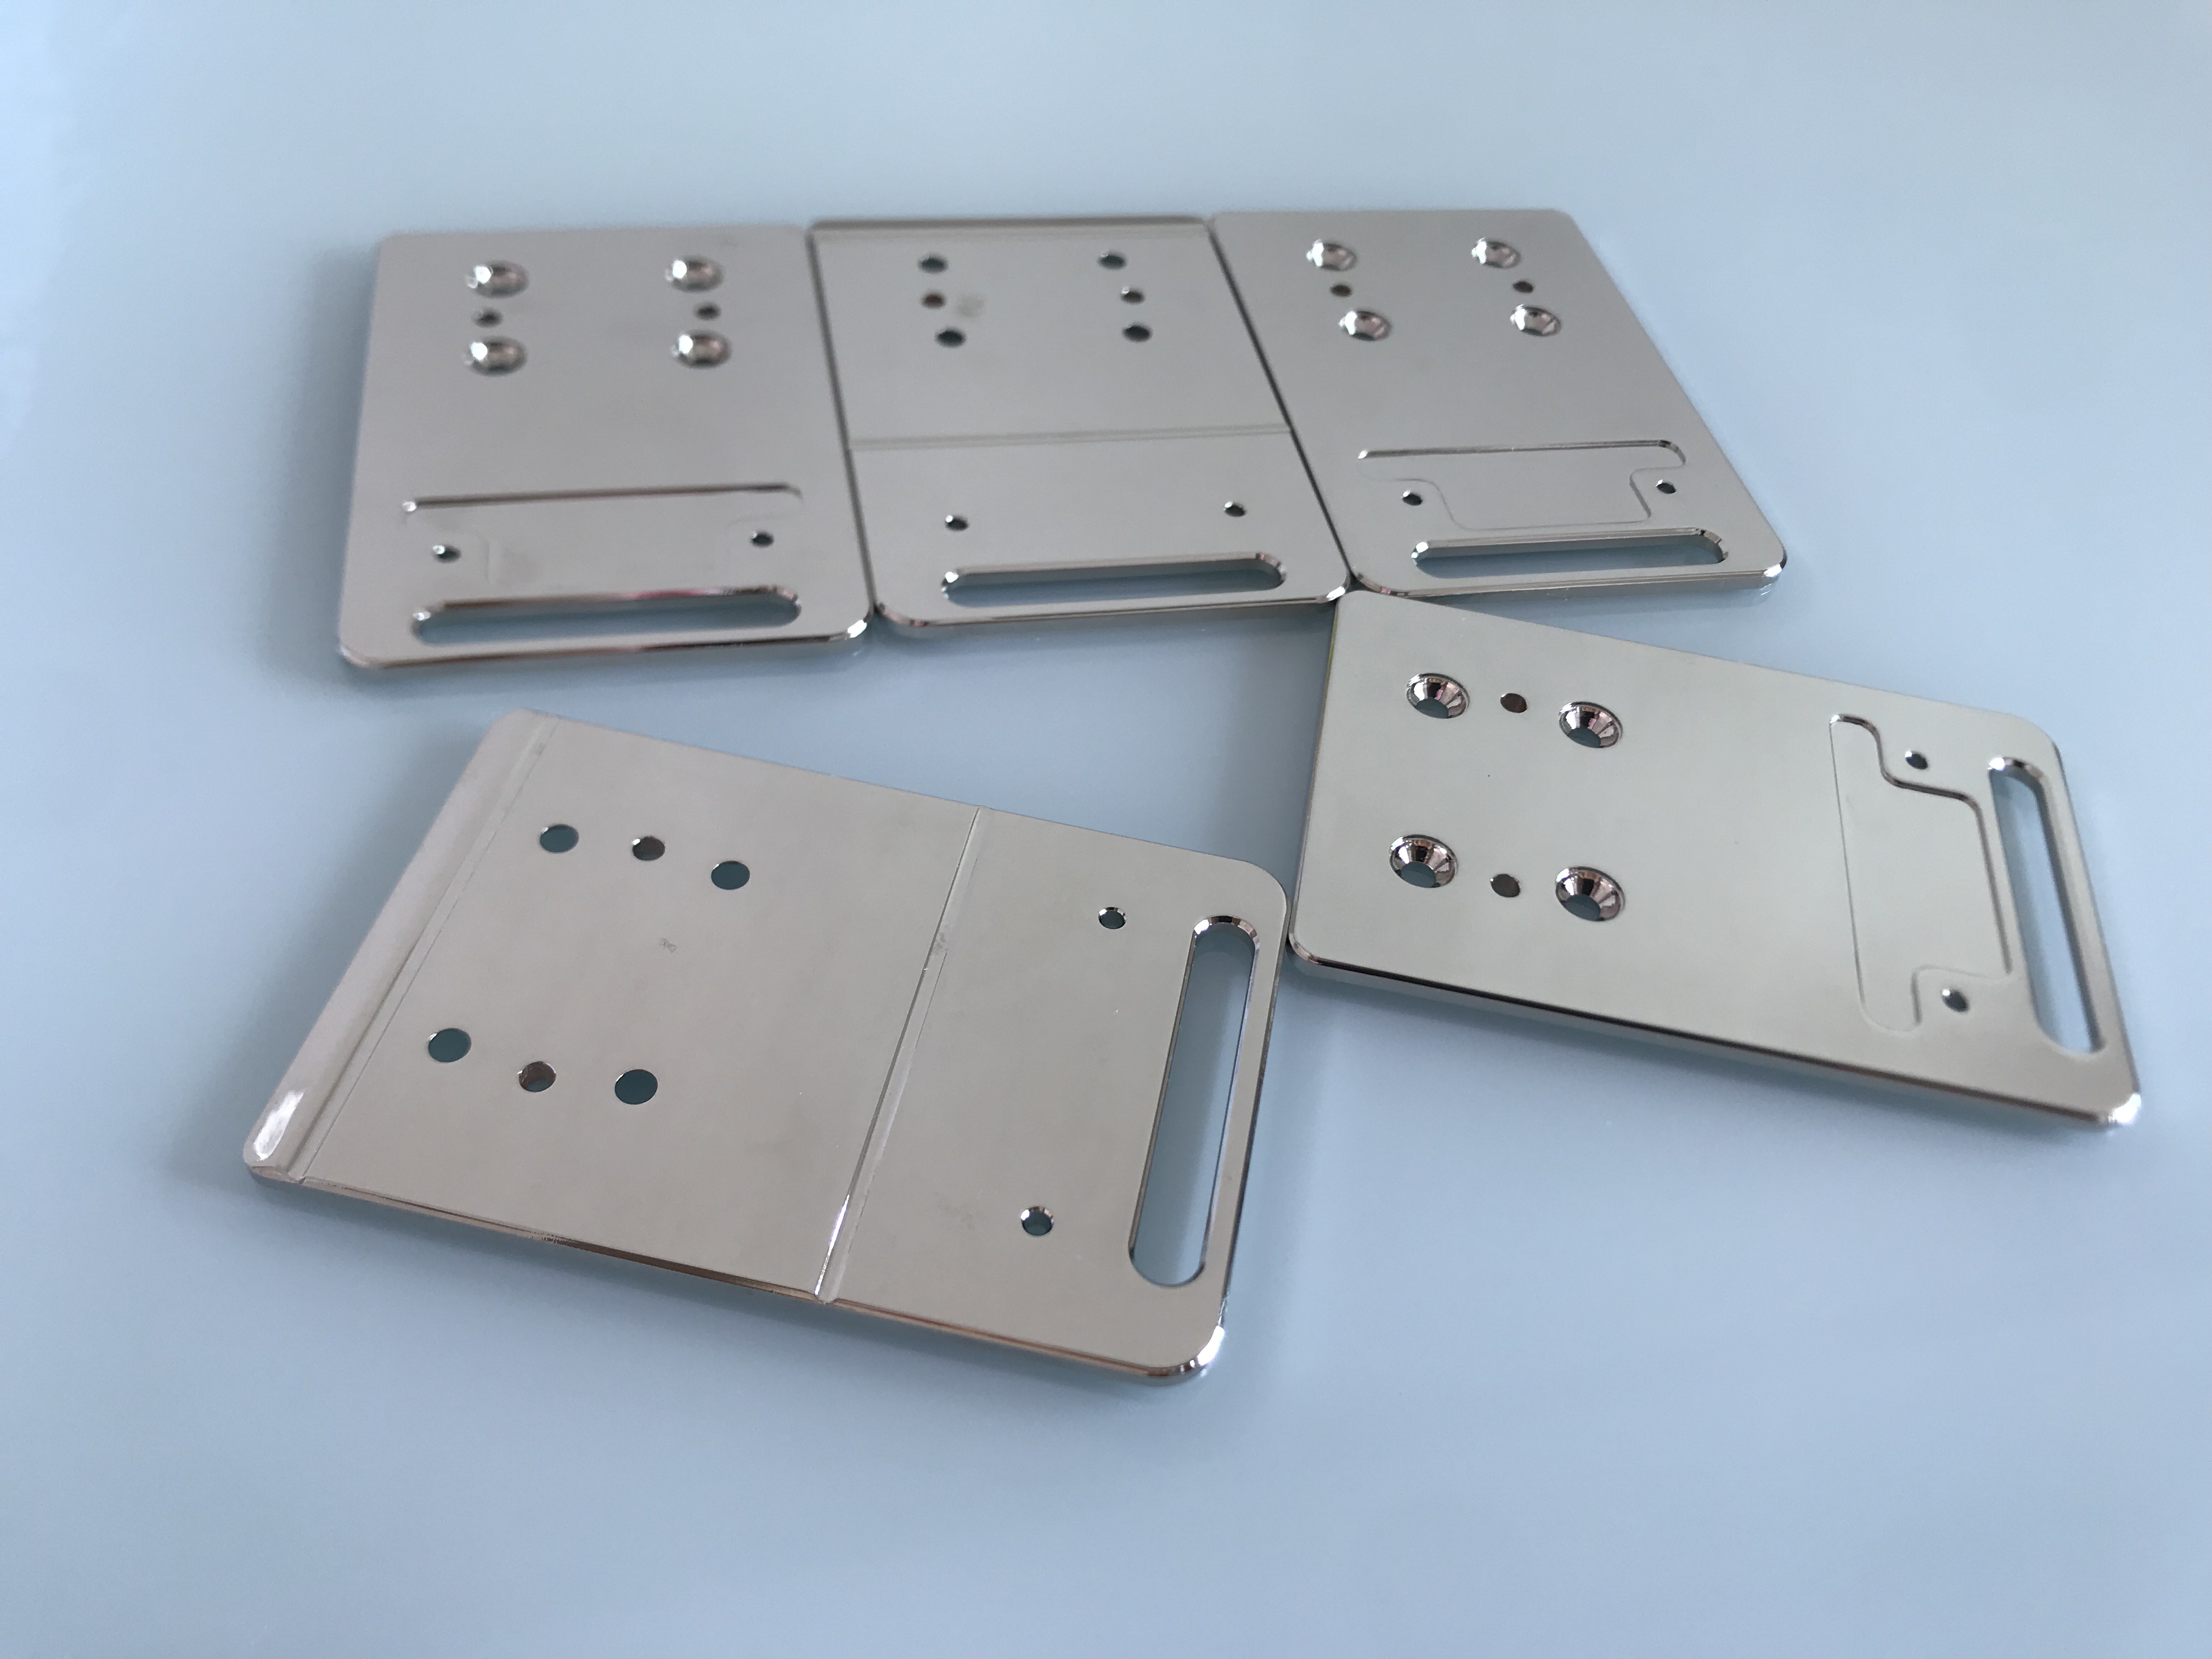 LED module base copper alloy parts and nickel plate finish